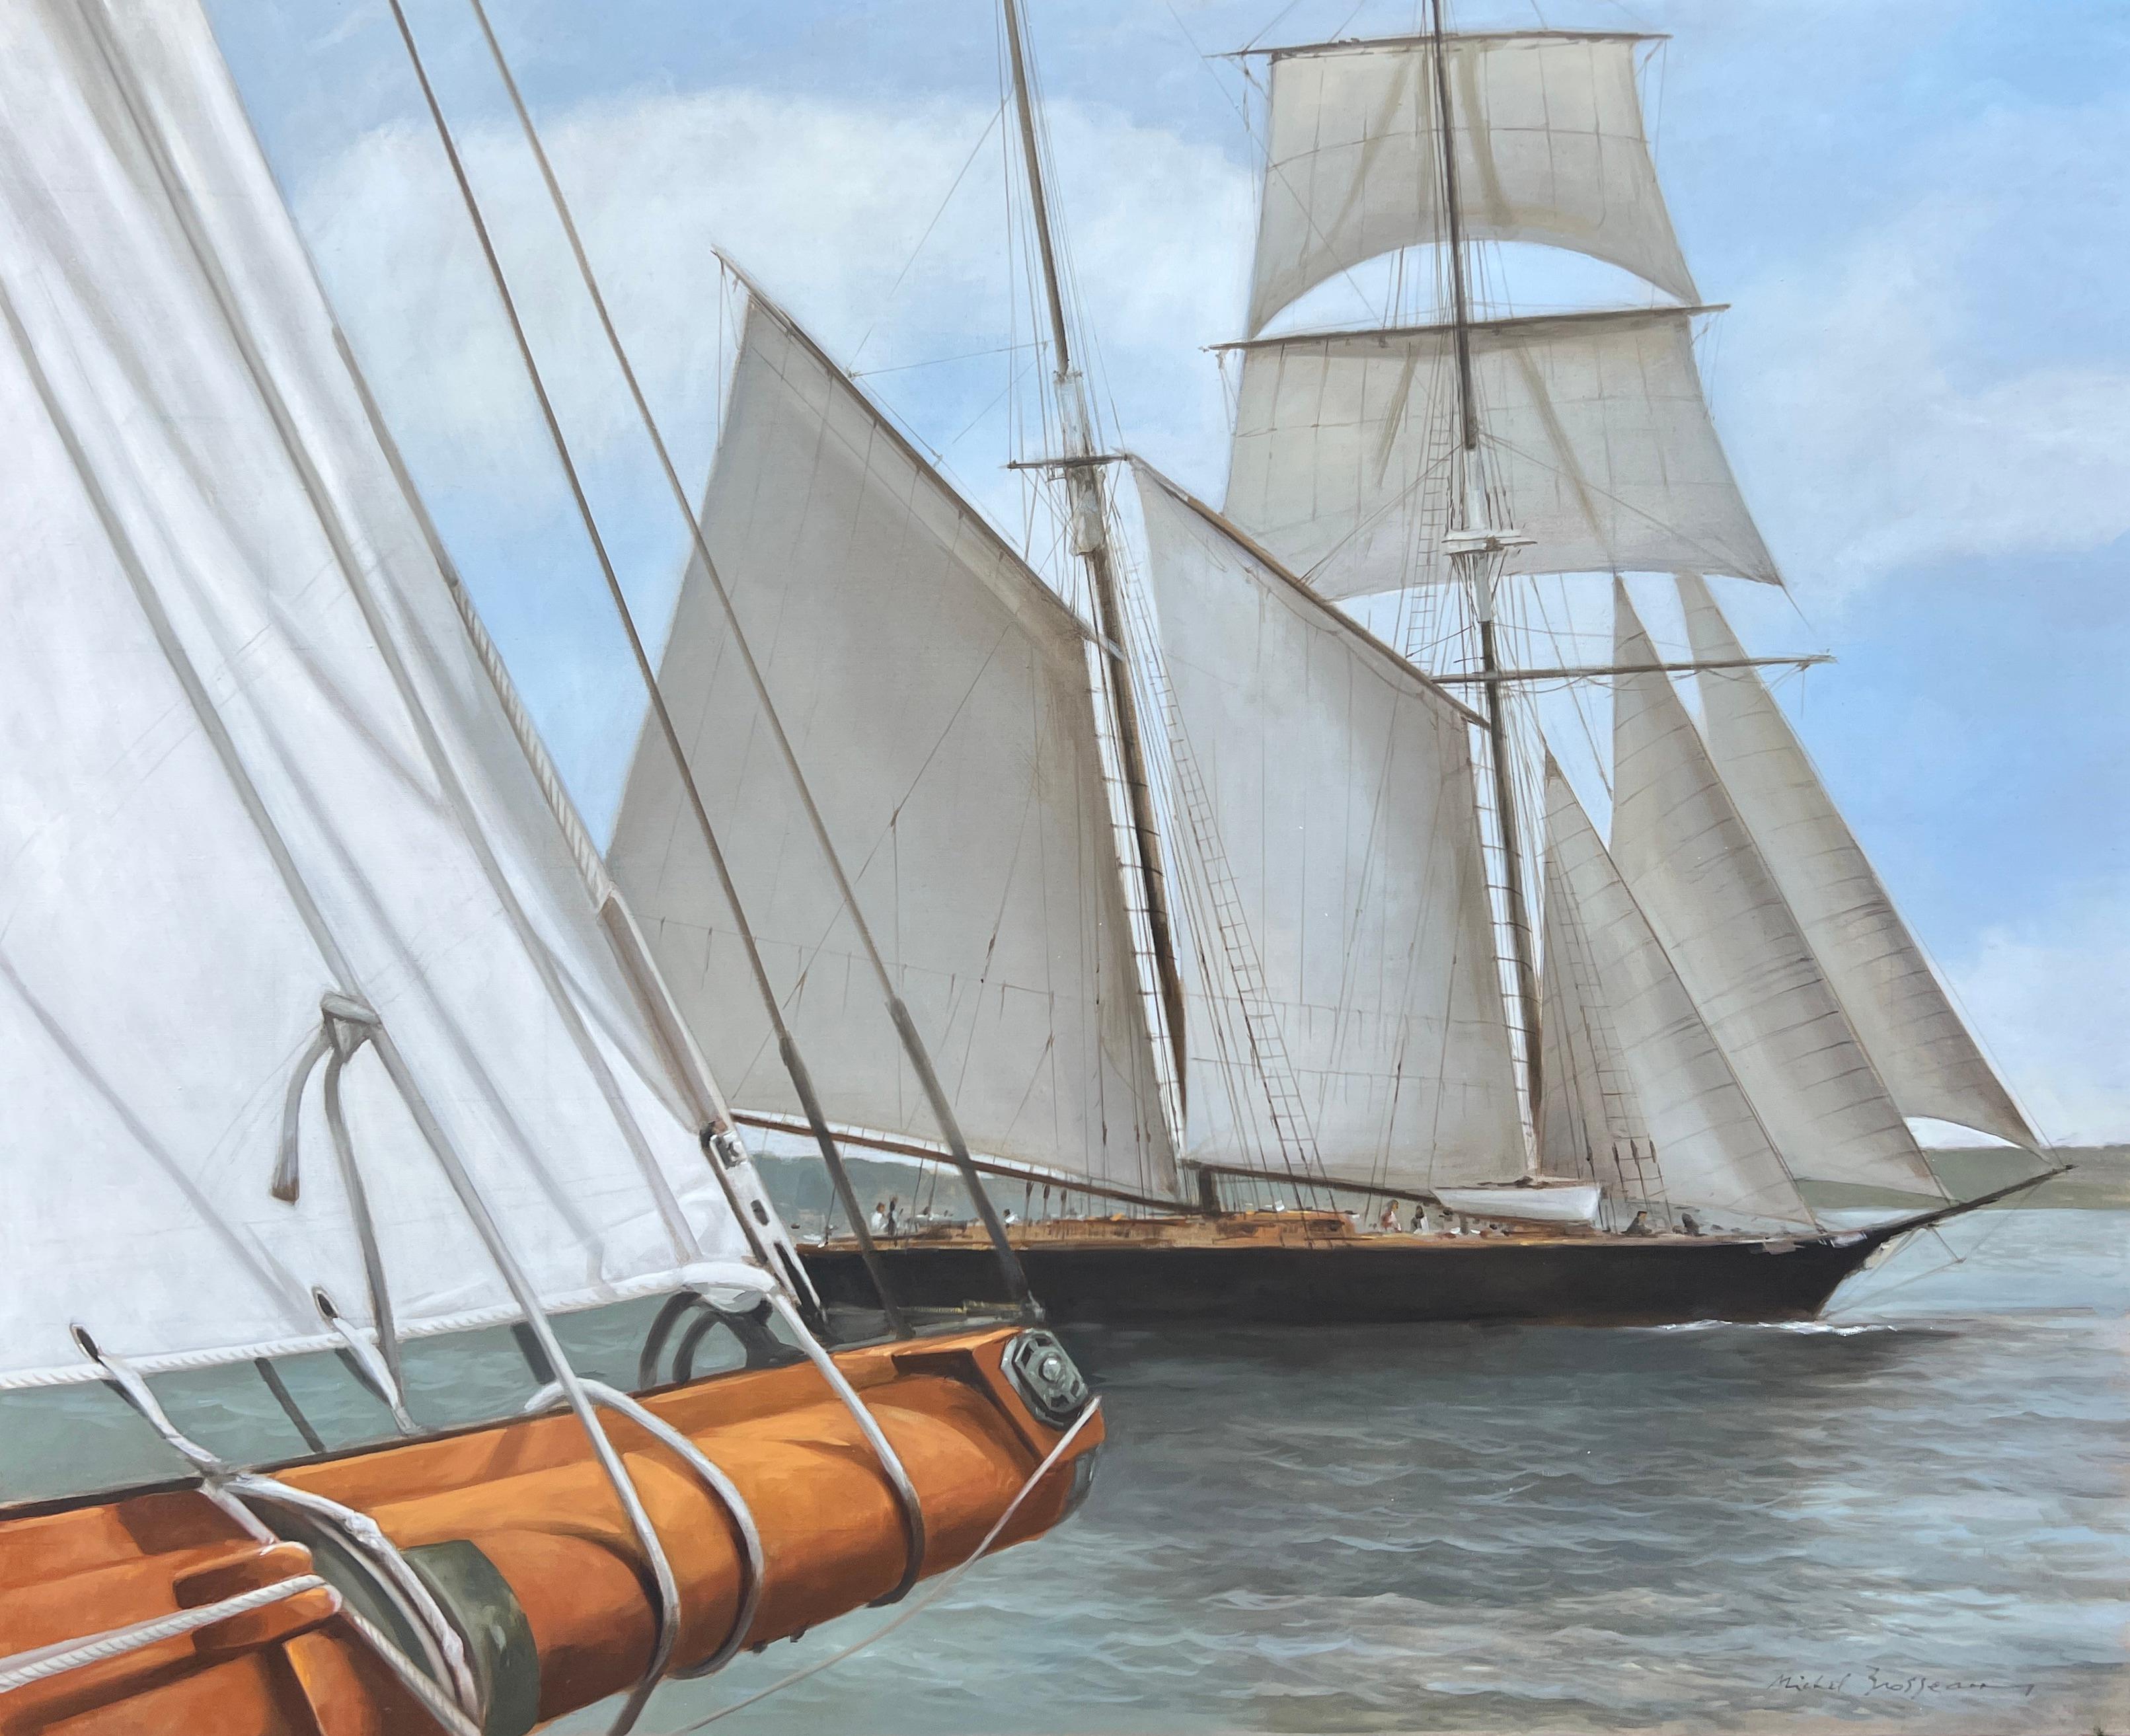 Michel Brosseau Still-Life Painting - "Le Grand Voilier" photorealist oil painting, bow of sailboat, tall ship behind